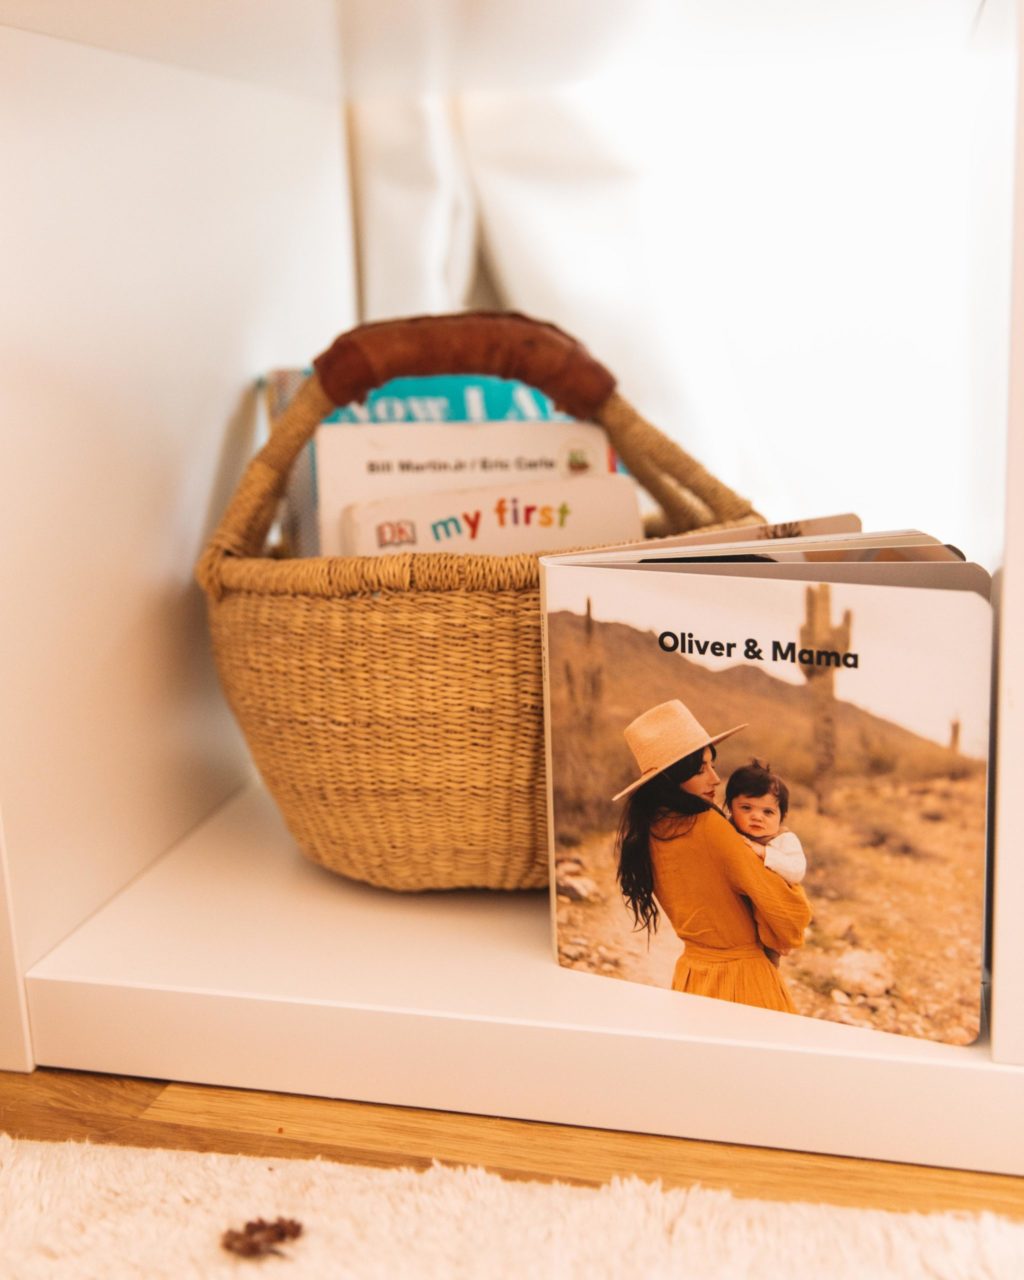 Montessori inspired books for 0-12 months